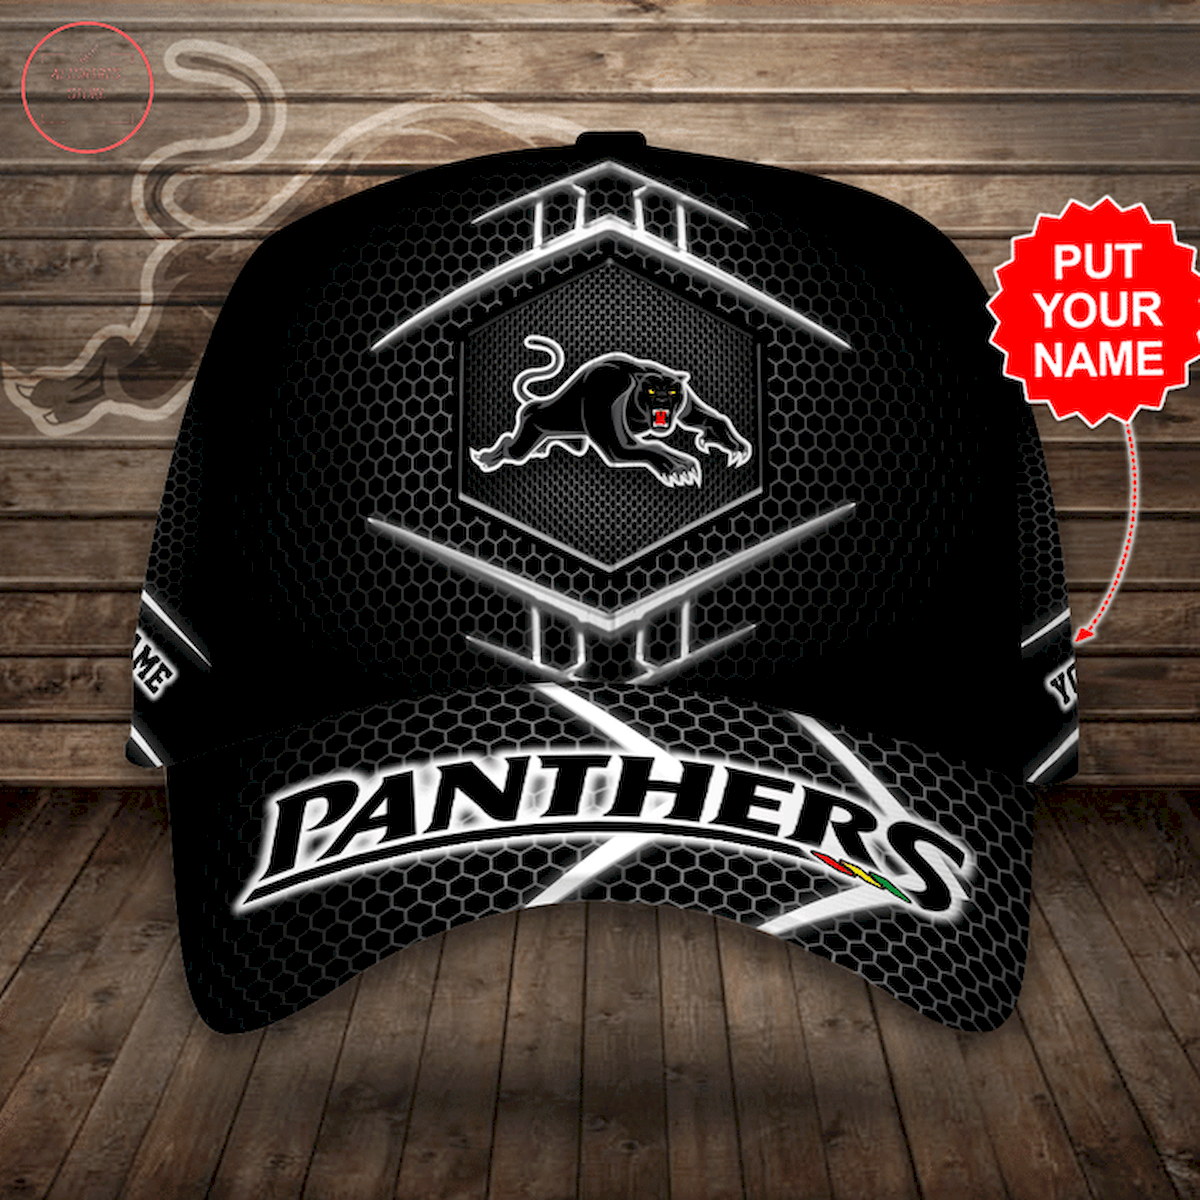 NRL Penrith Panthers Personalized Hat Cap